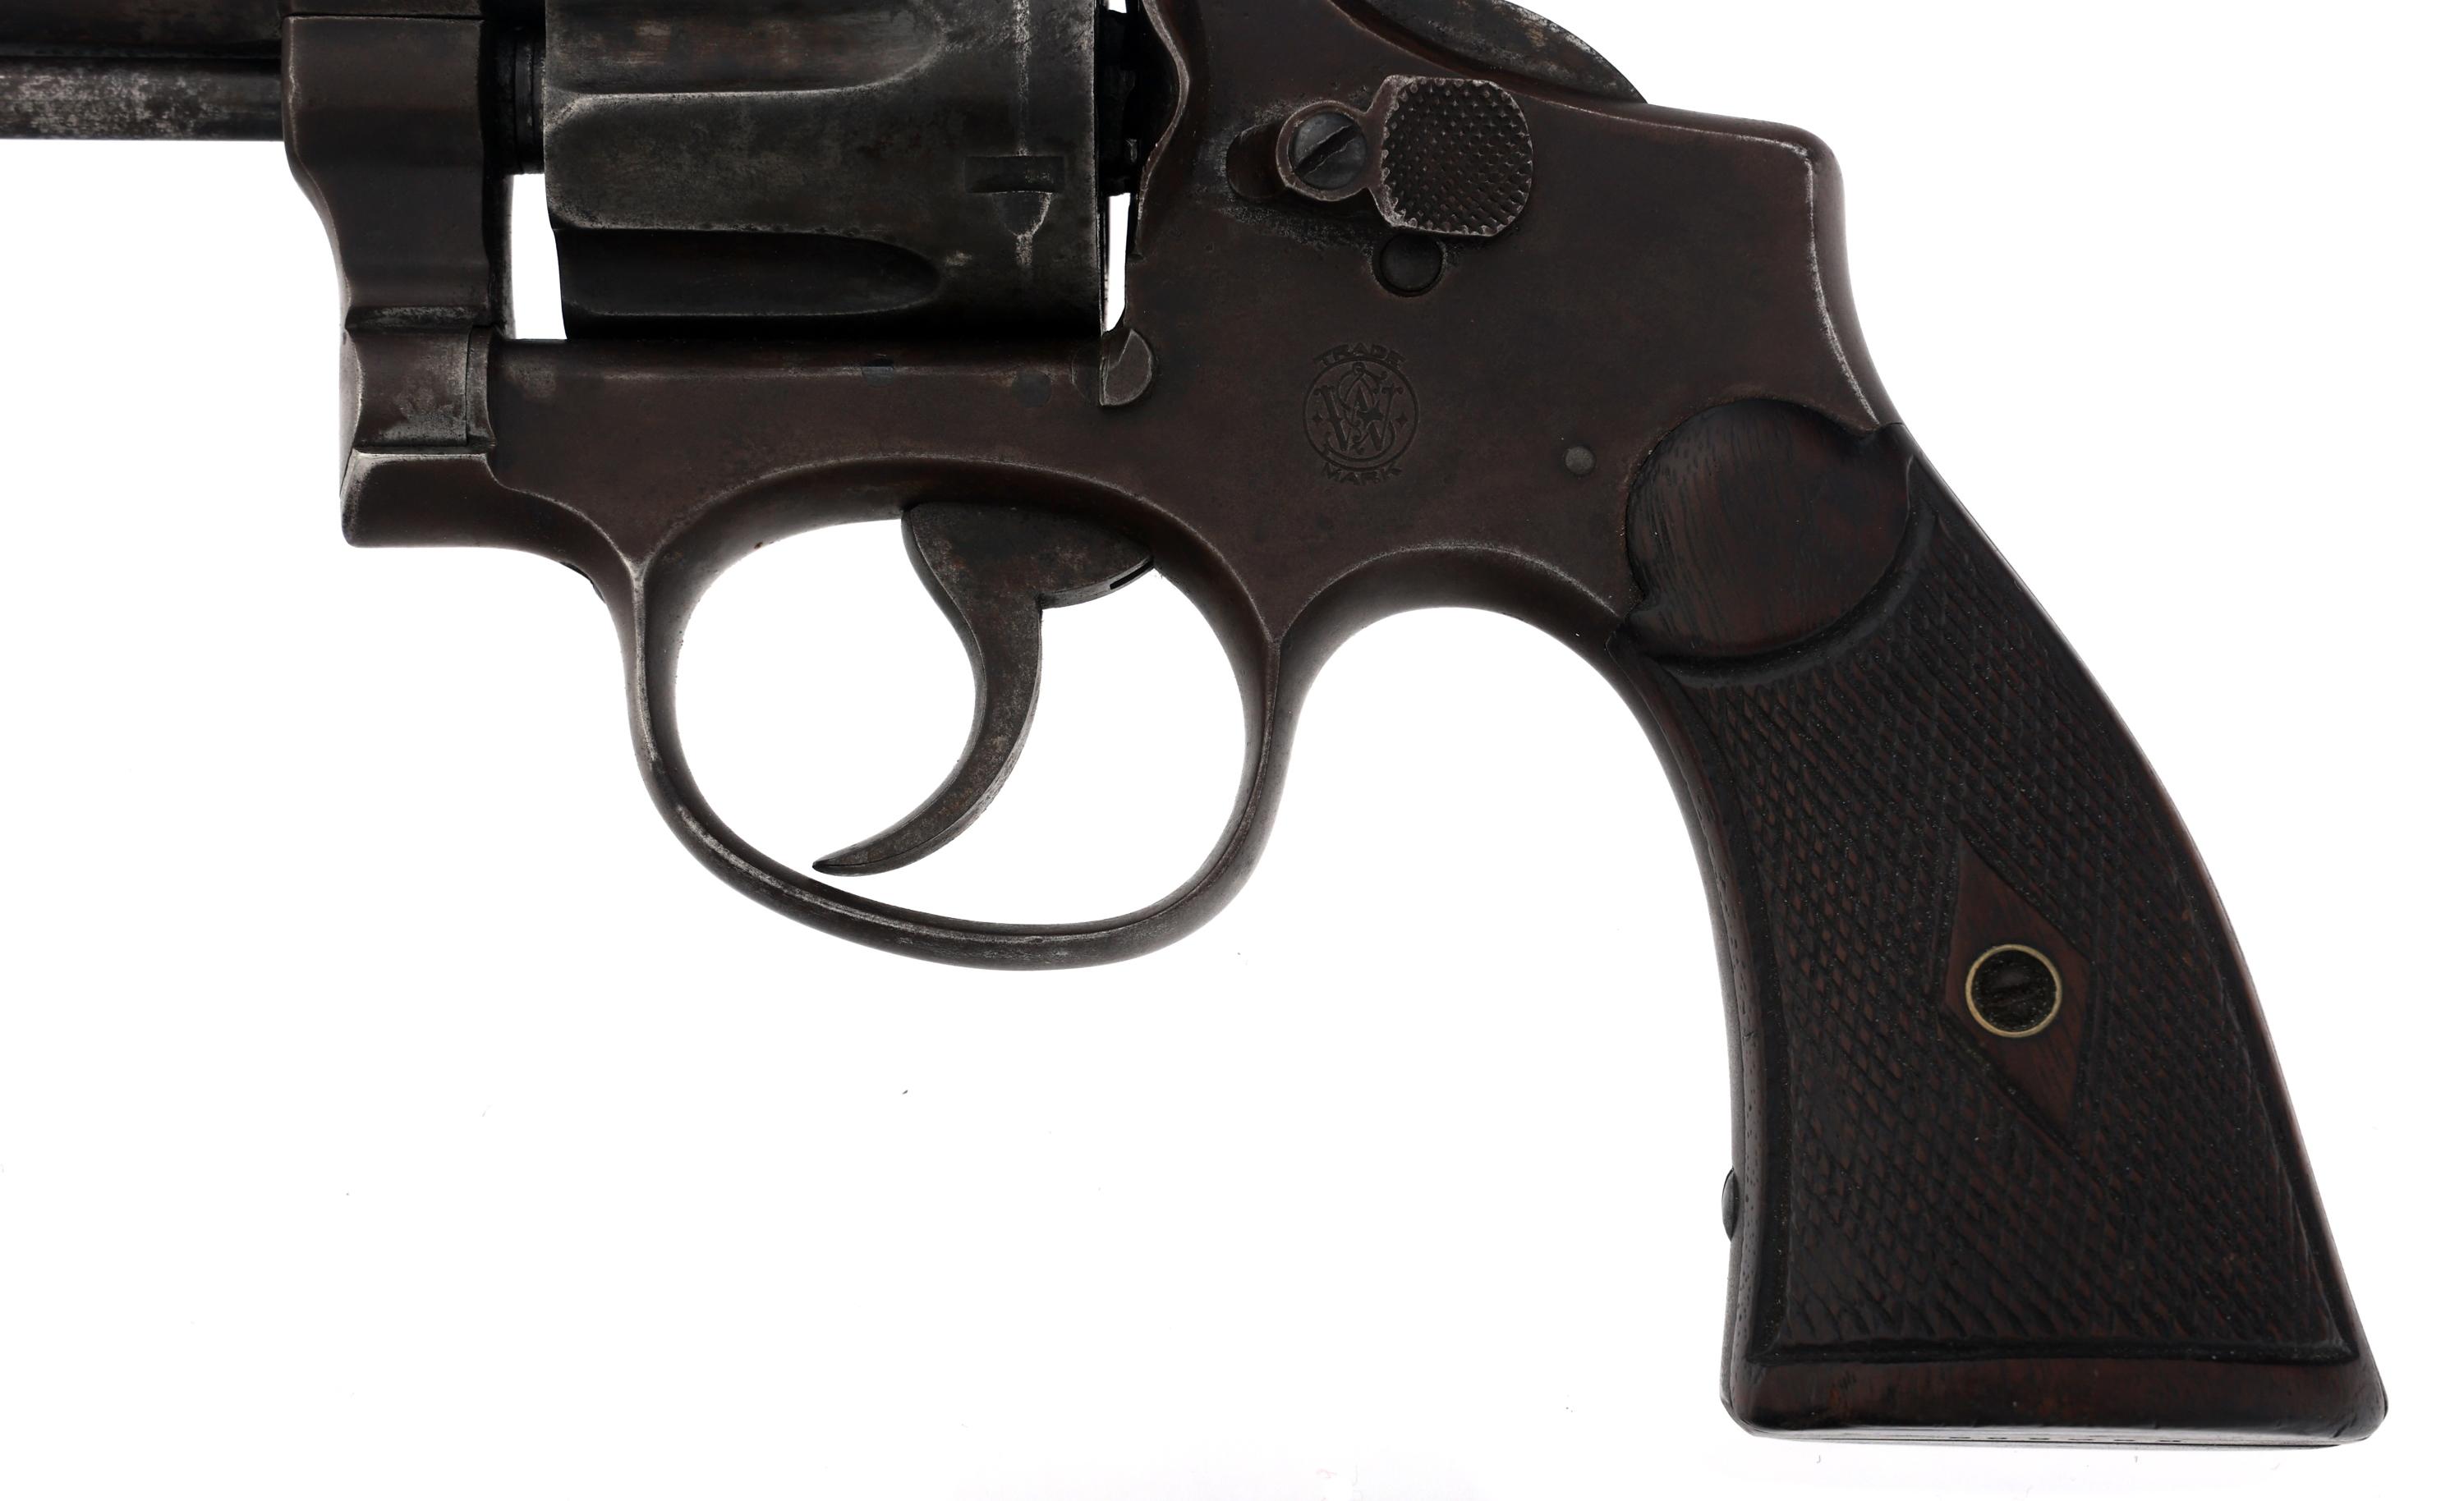 SMITH & WESSON MODEL OF 1905 4th CHANGE REVOLVER